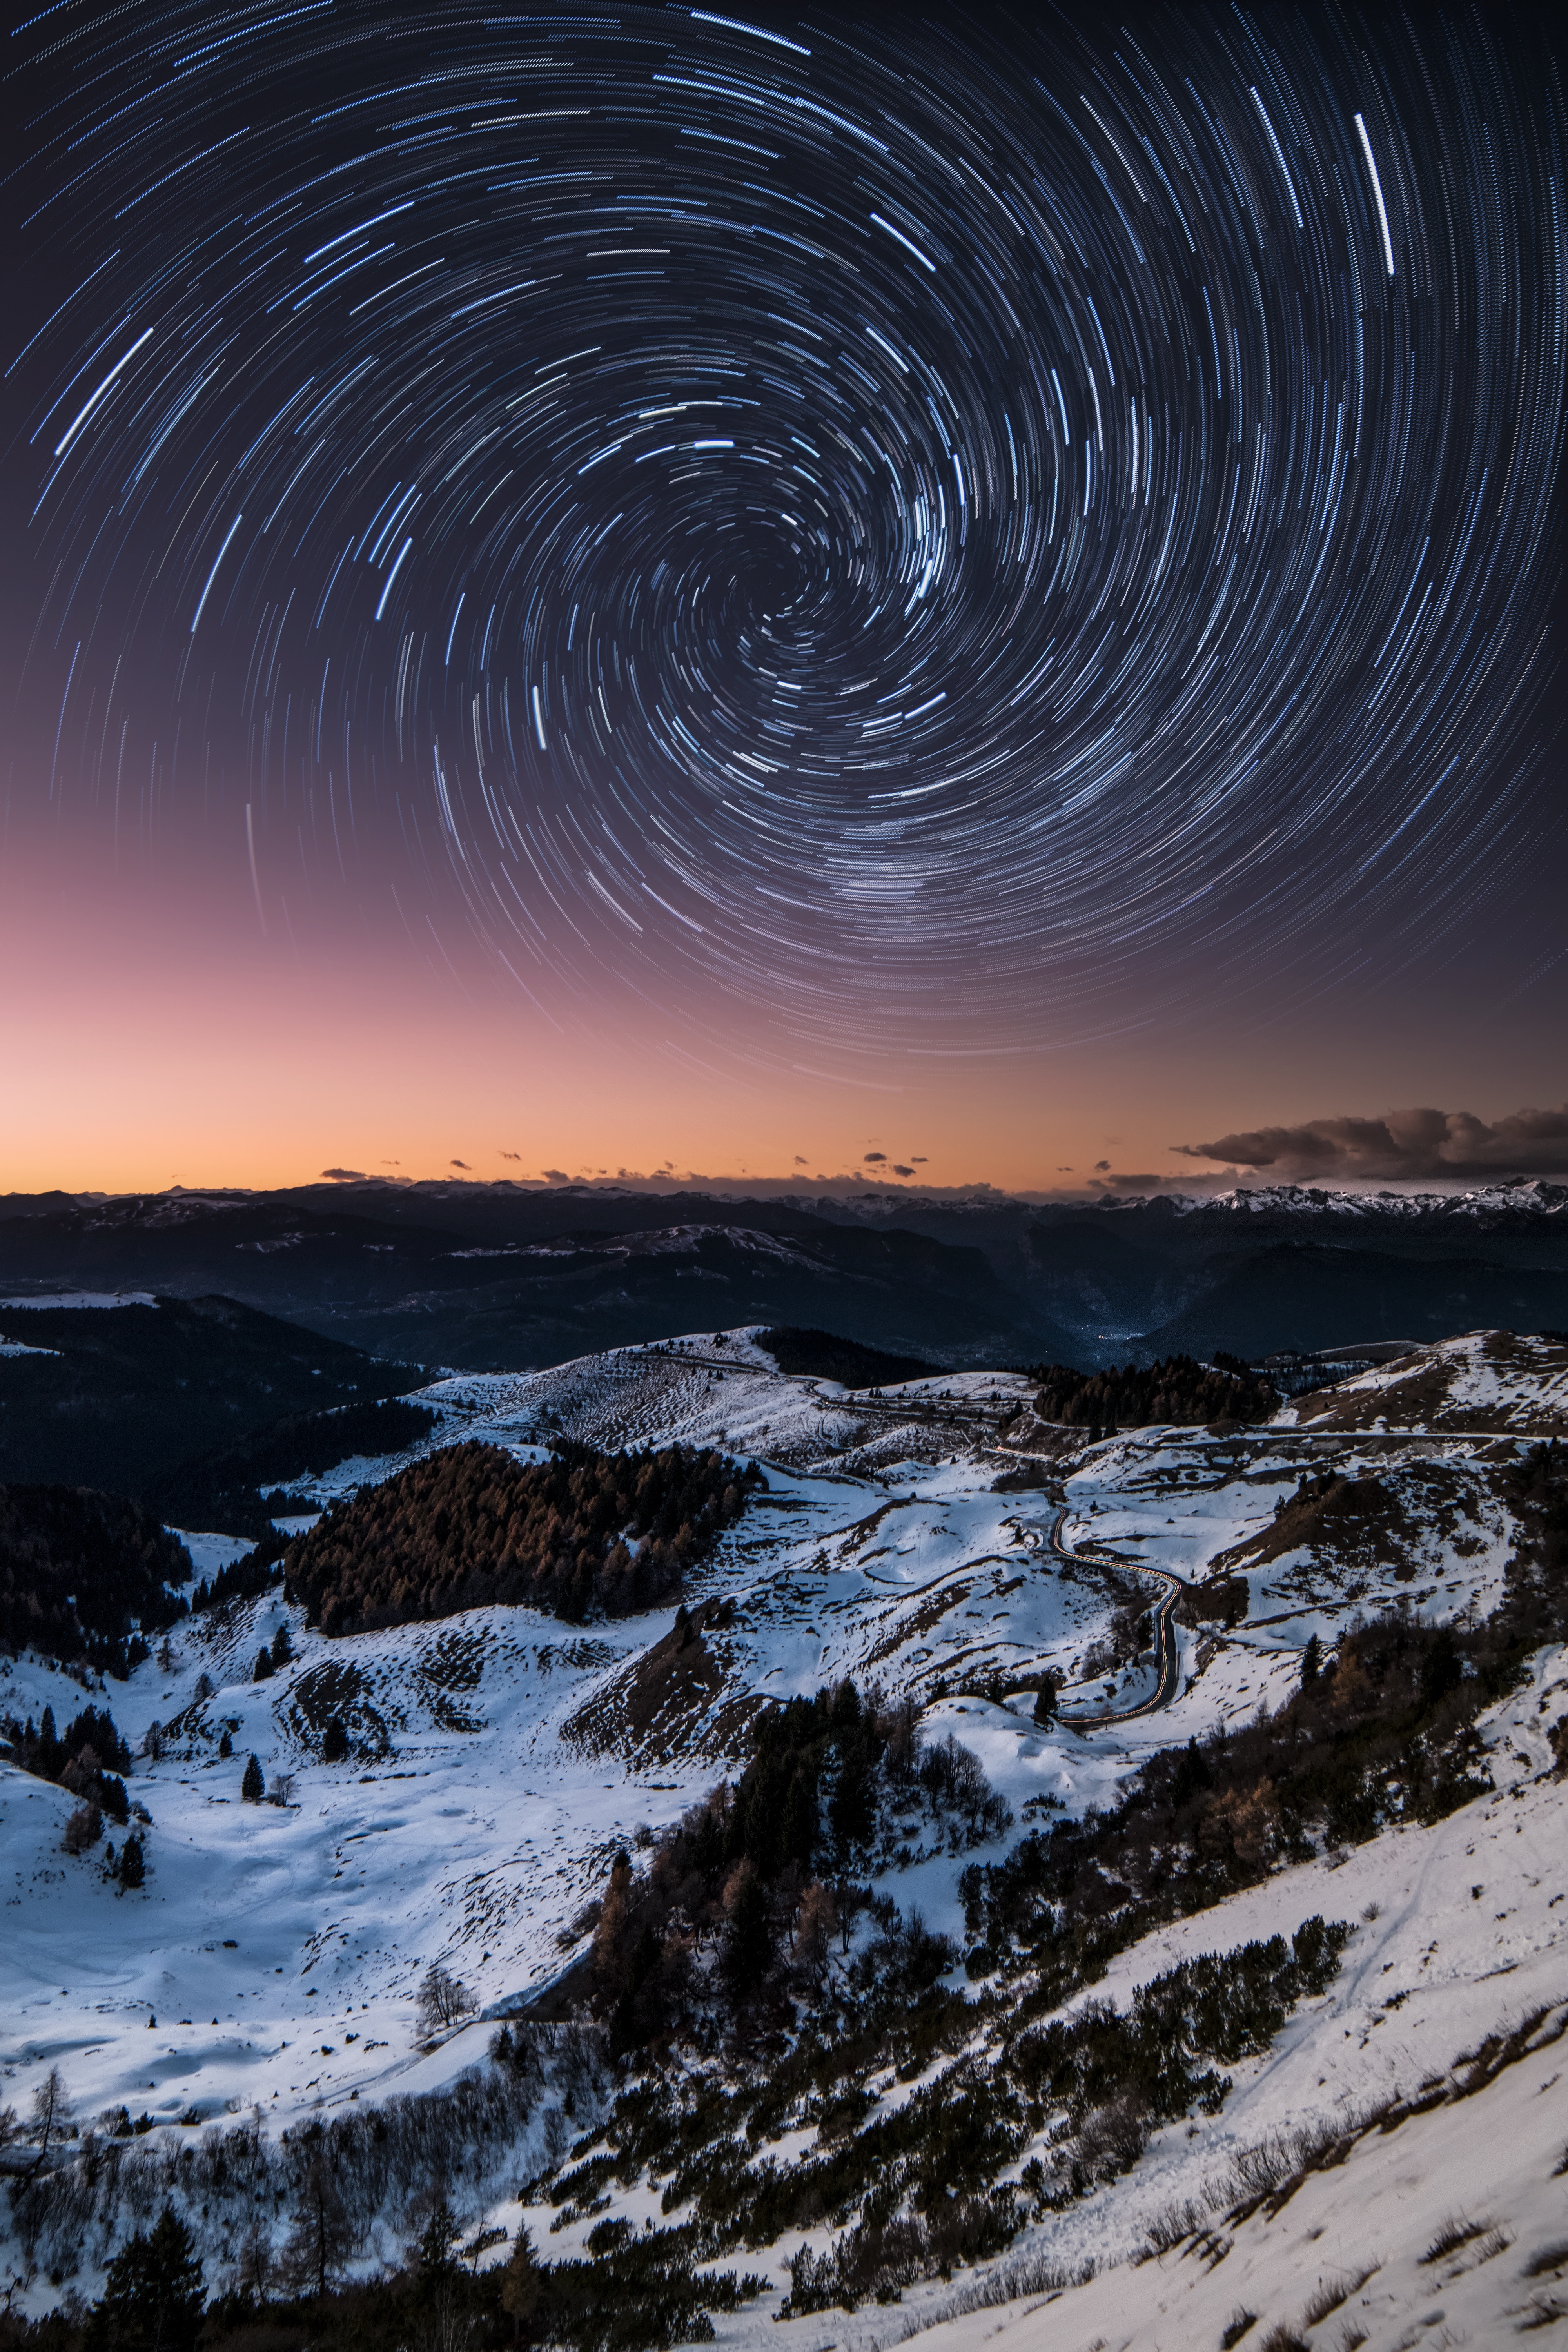 vertex, nature, mountains, night, italy, top, starry sky, dolomites High Definition image